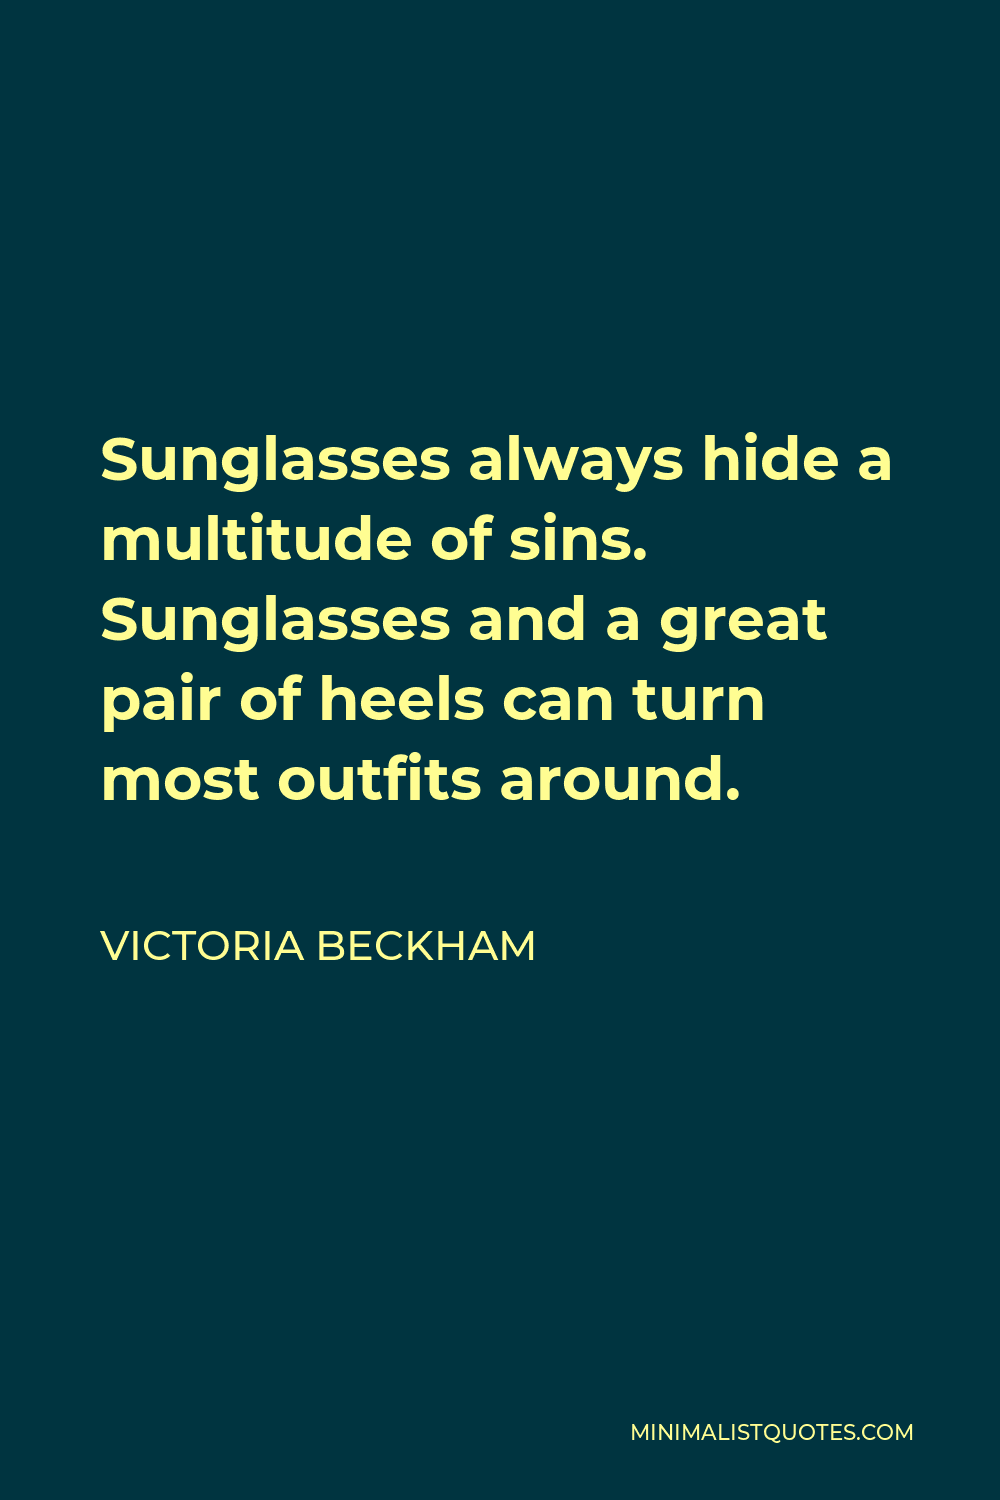 Victoria Beckham Quote - Sunglasses always hide a multitude of sins. Sunglasses and a great pair of heels can turn most outfits around.